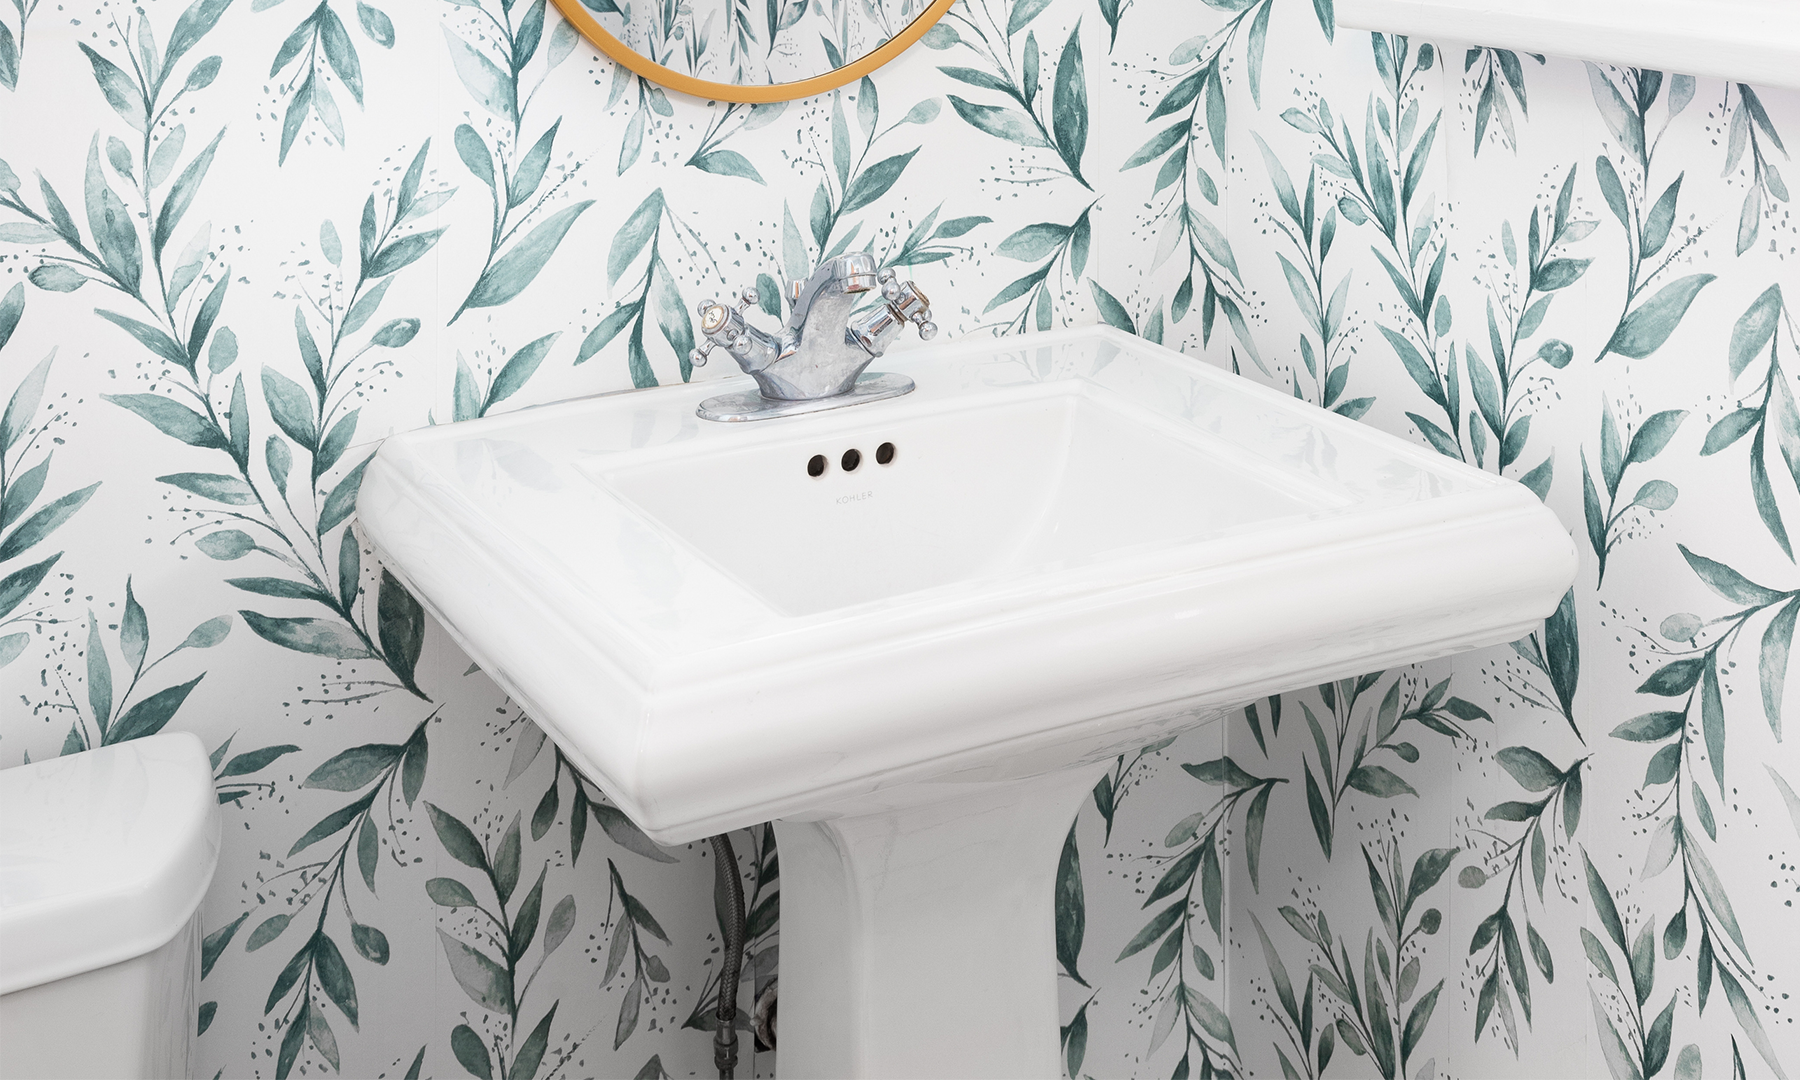 White pedestal sink with chrome faucet in a bathroom with white wallpaper with green leaves on it